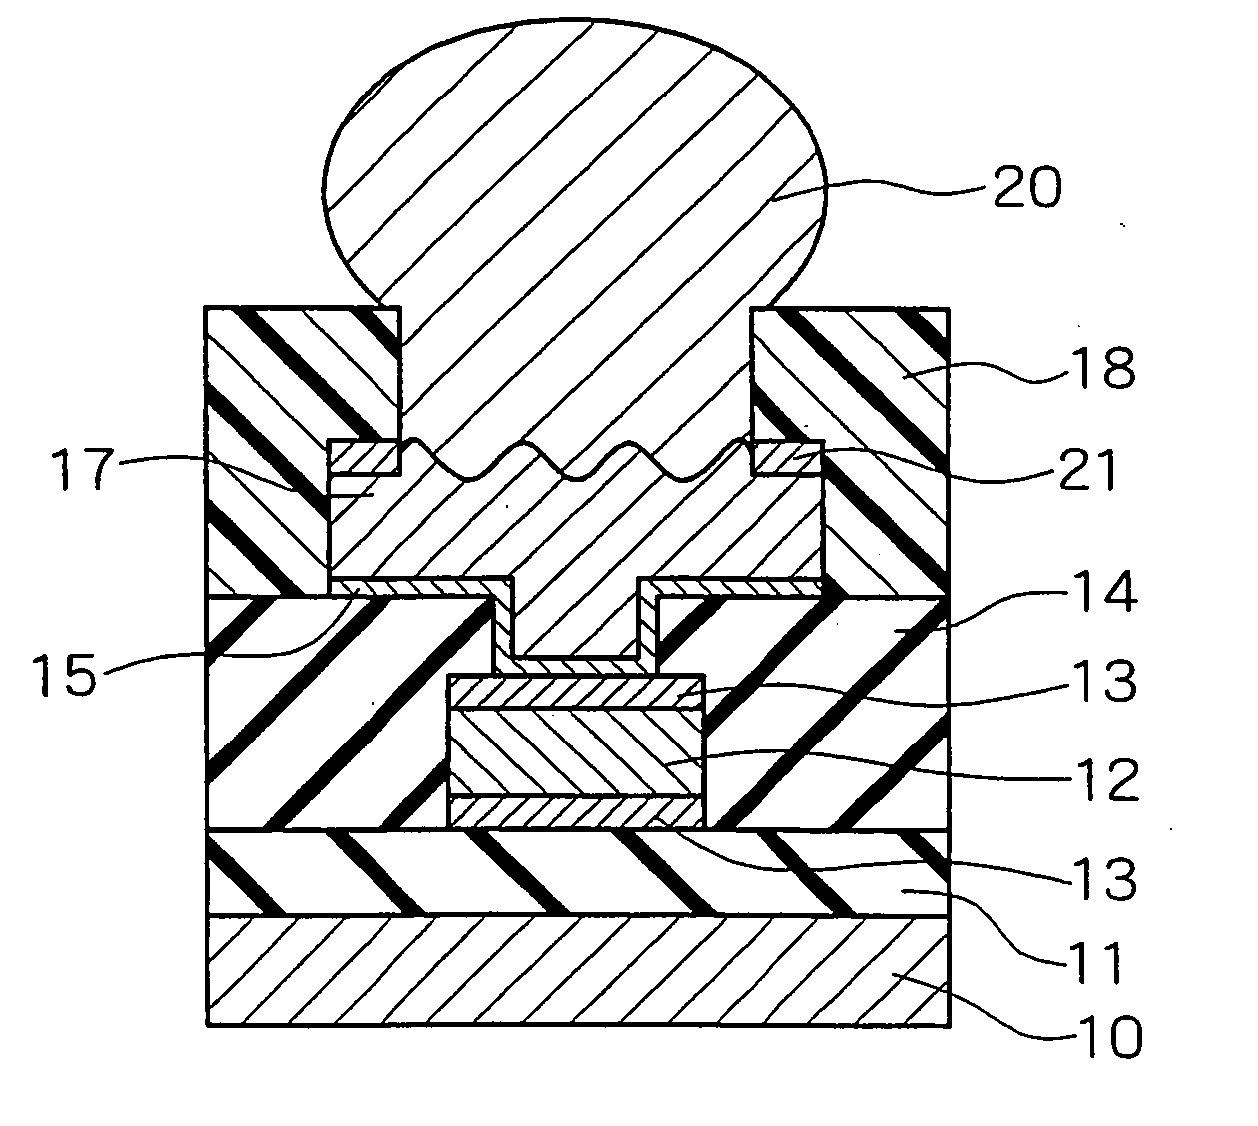 Process or making a semiconductor device having a roughened surface